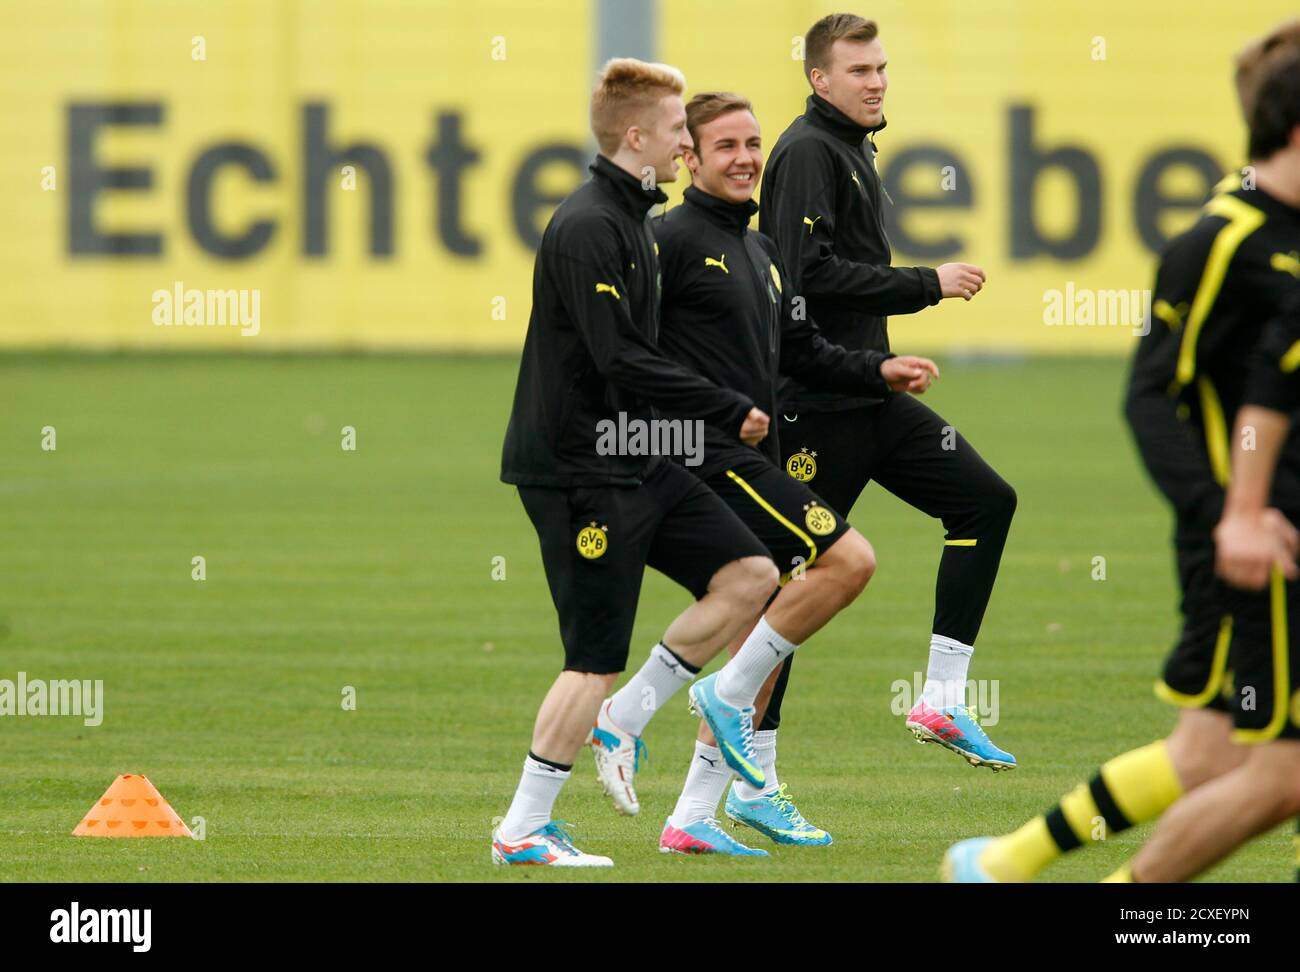 Borussia Dortmund S Marco Reus Mario Goetze And Kevin Grosskreutz L R Warm Up During A Training Session In Dortmund April 23 13 Dortmund Will Play The Champions League First Leg Semi Final Soccer Match